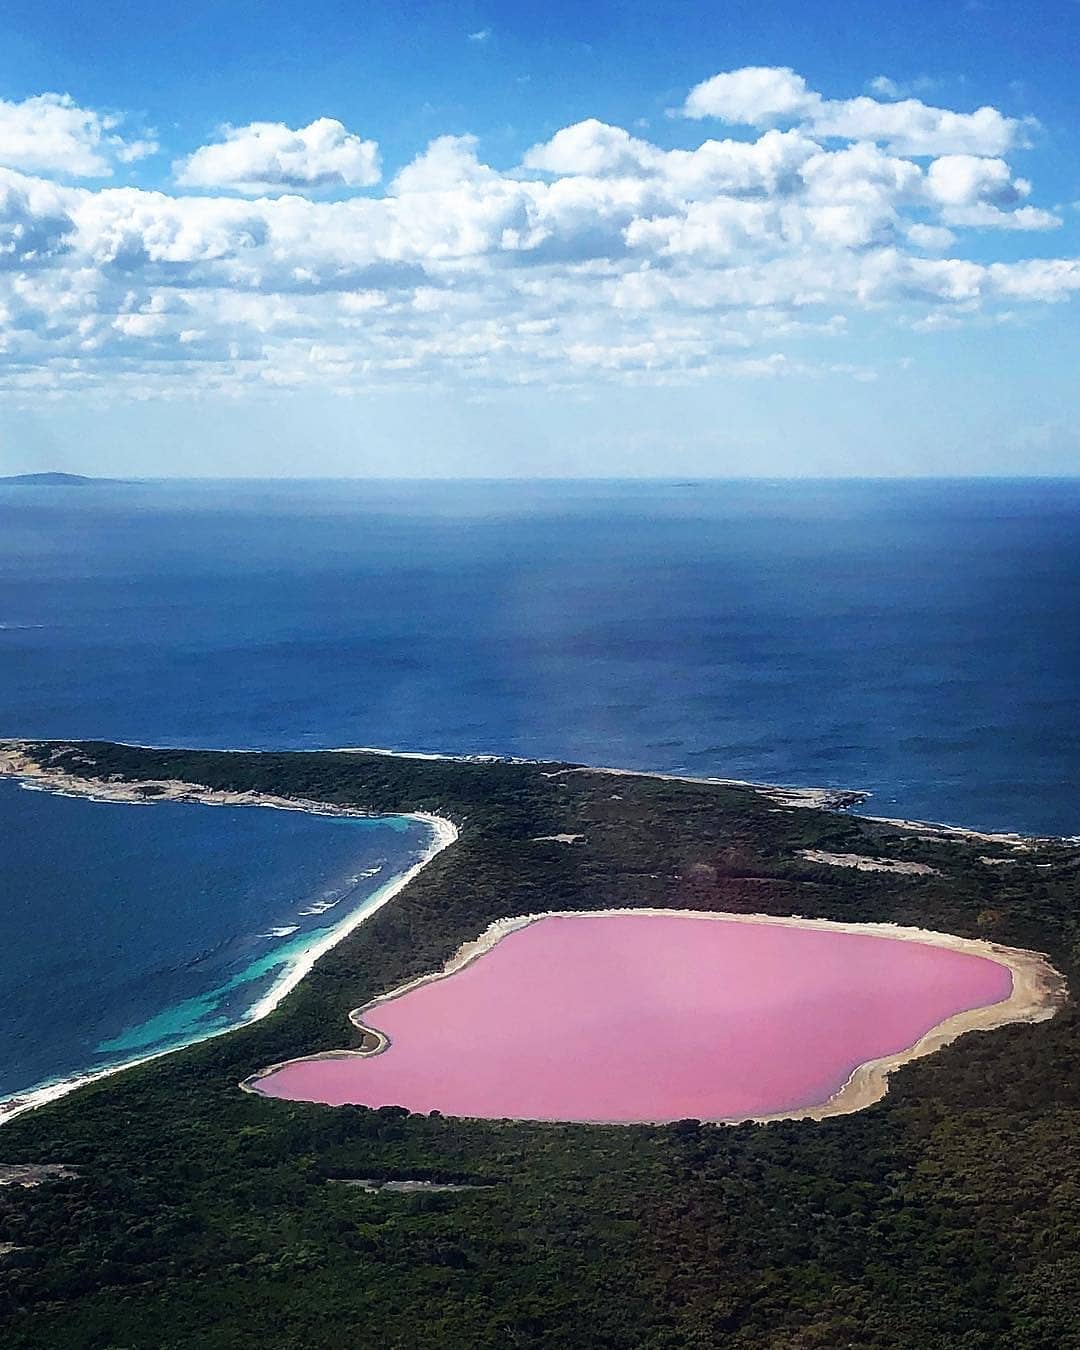 🔷@Regran_ed from @australiasgoldenoutback -  How is this real life?! 😍 Lake Hillier on Middle island off the coast of Esperance is an absolute dream to see in person 💕 As it is situated on an island, the only way to see this bubblegum coloured beauty is from the sky, or on a charter boat 🚤 The contrasting pink, greens, blues, together with the amazing islands of the Recherché Archipelago as the backdrop, creates a sight you'll never forget! 📷 @molityf 📍 Lake Hillier, on Middle Island, @ExperienceEsperance @VisitEsperance @WesternAustralia @Australia - #westernaustralia